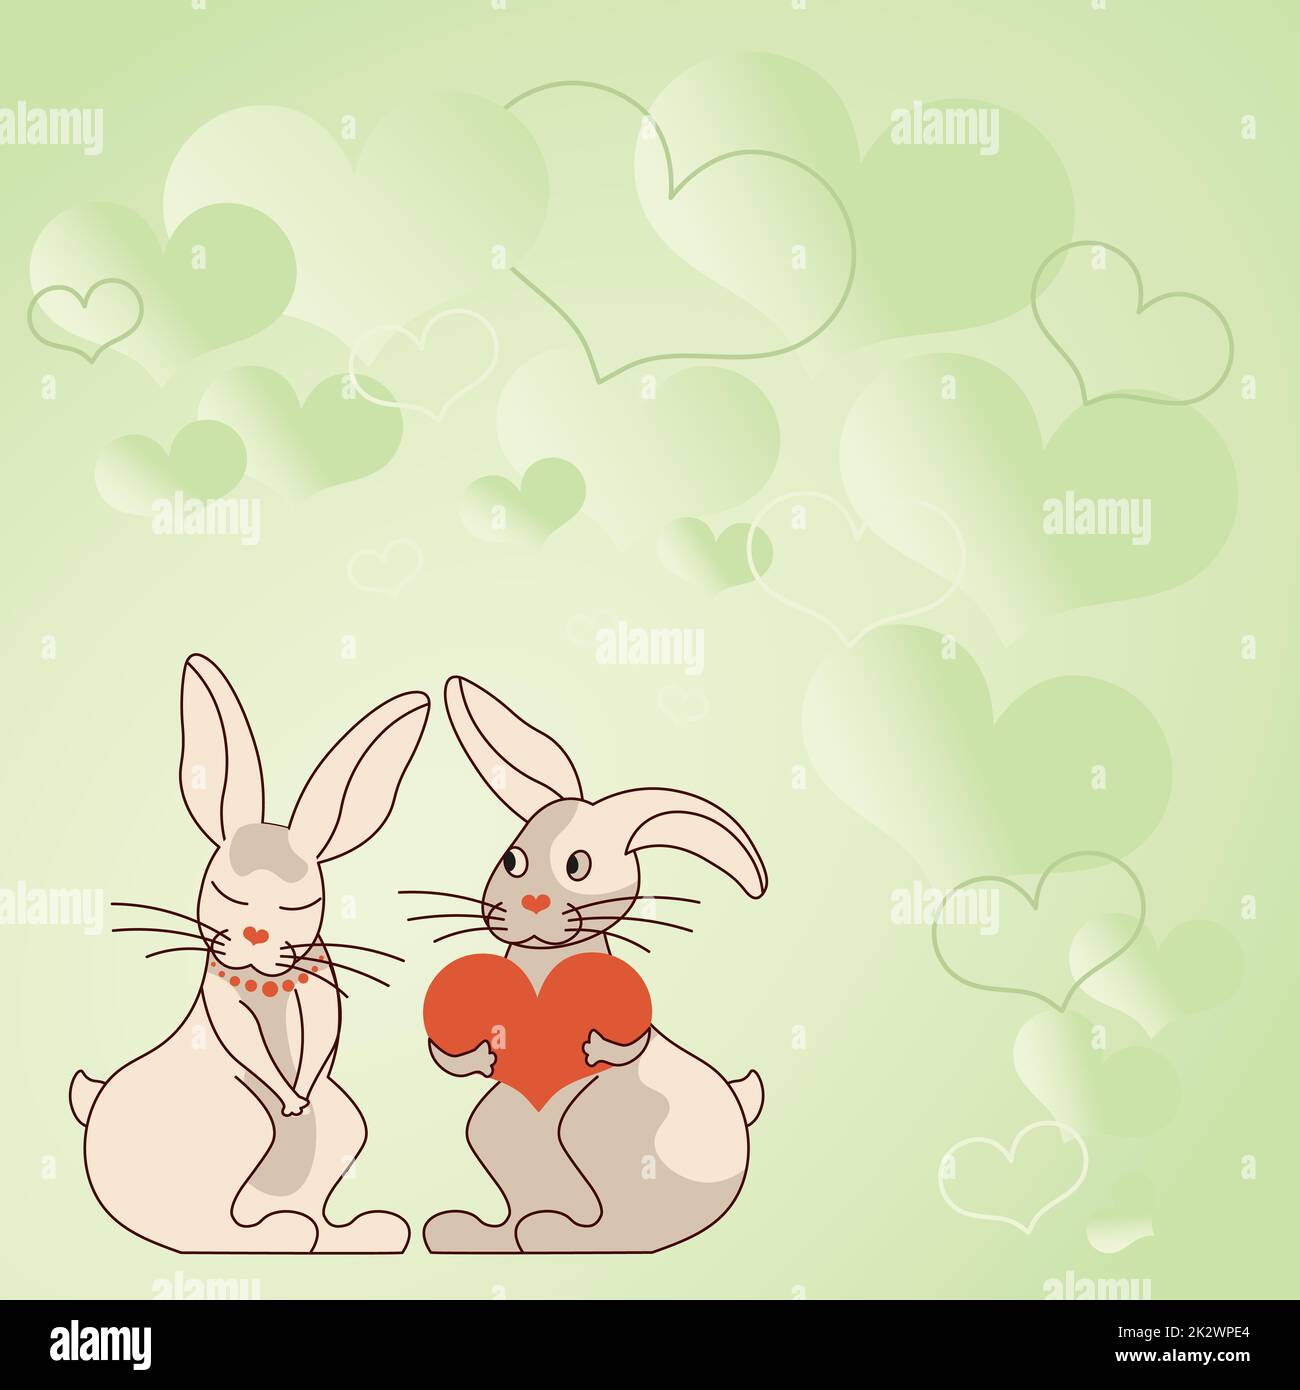 Two rabbits with heart shaped gifts with heartful background demonstrate couples exchanging offerings. Bunnies represent passionate lovers with lovely presents. Stock Photo